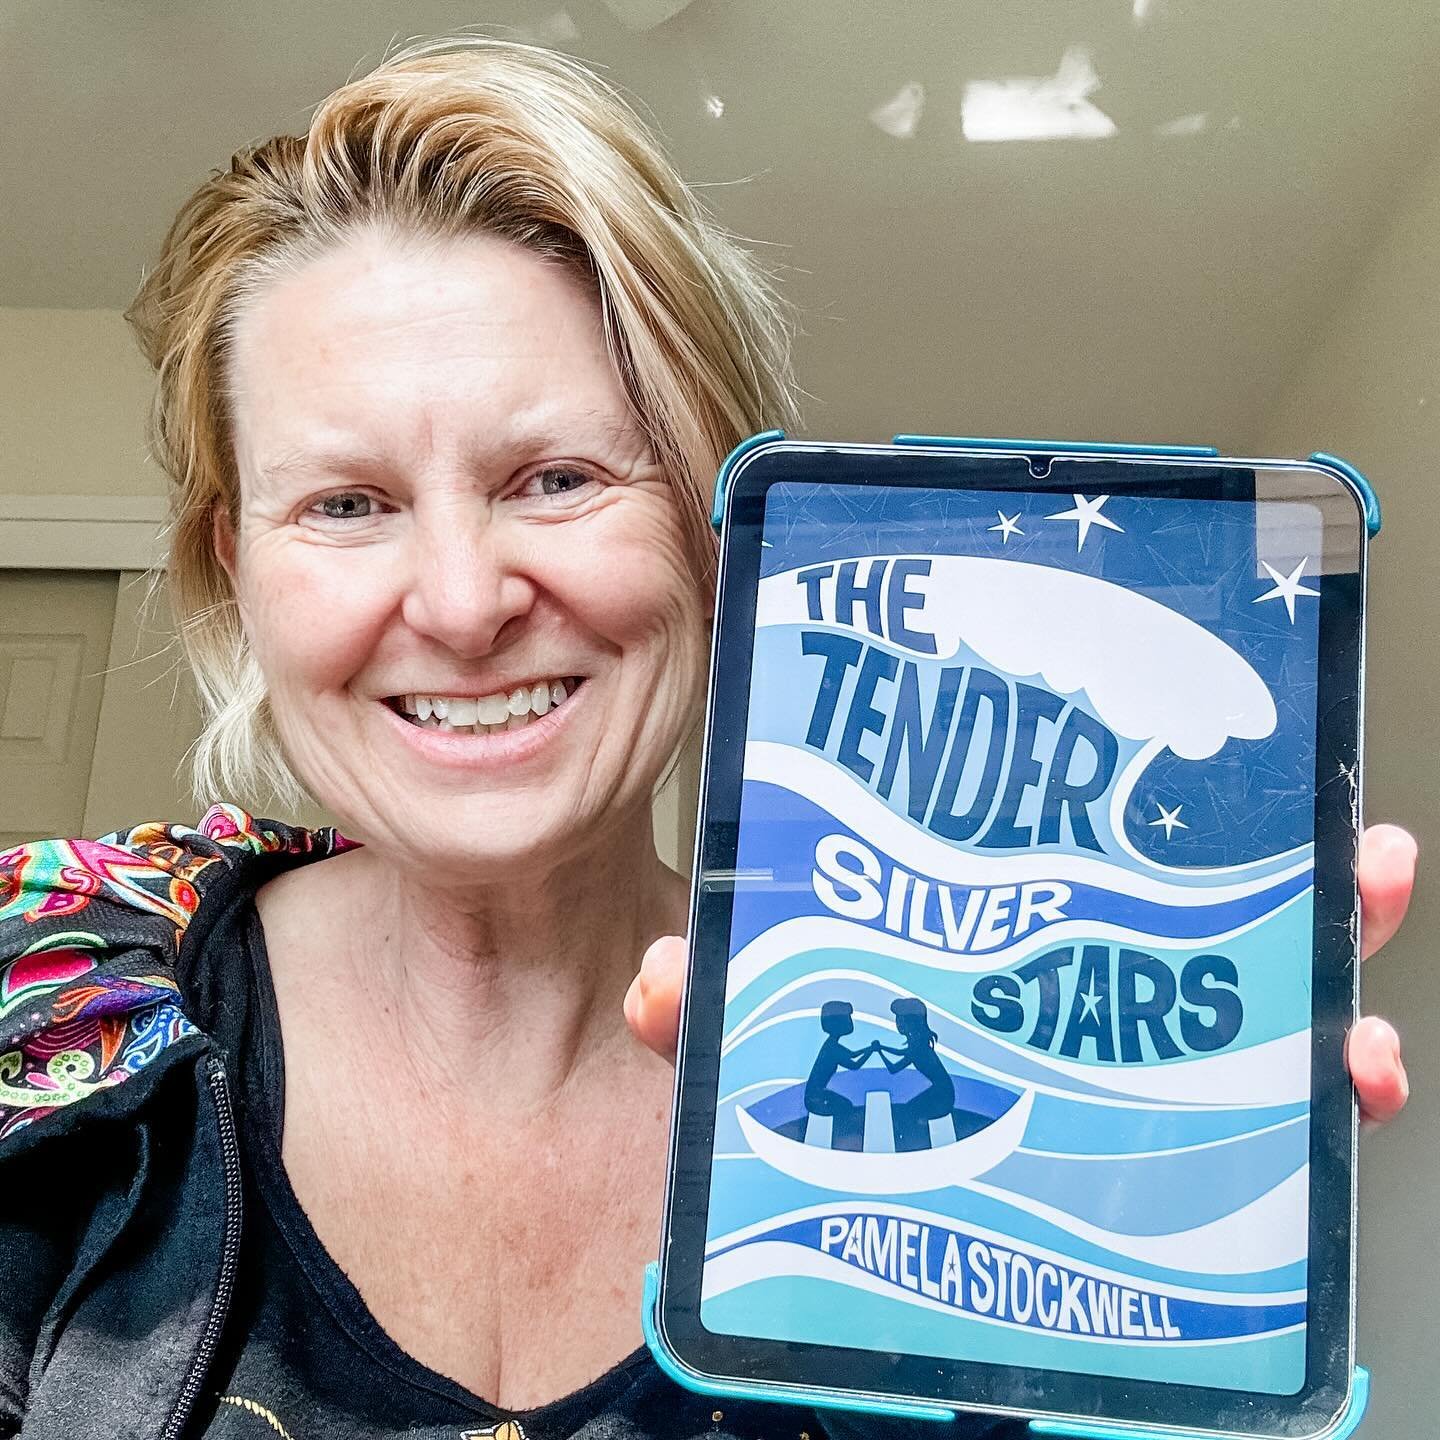 I shared a birthday yesterday with this heartwarming book by Pamela Stockwell @pamelastockwellauthor - which I was lucky enough to read an early copy of!

Here my review (continued in the comments !) 😁

Set in the early 1970s, The Tender Silver Star